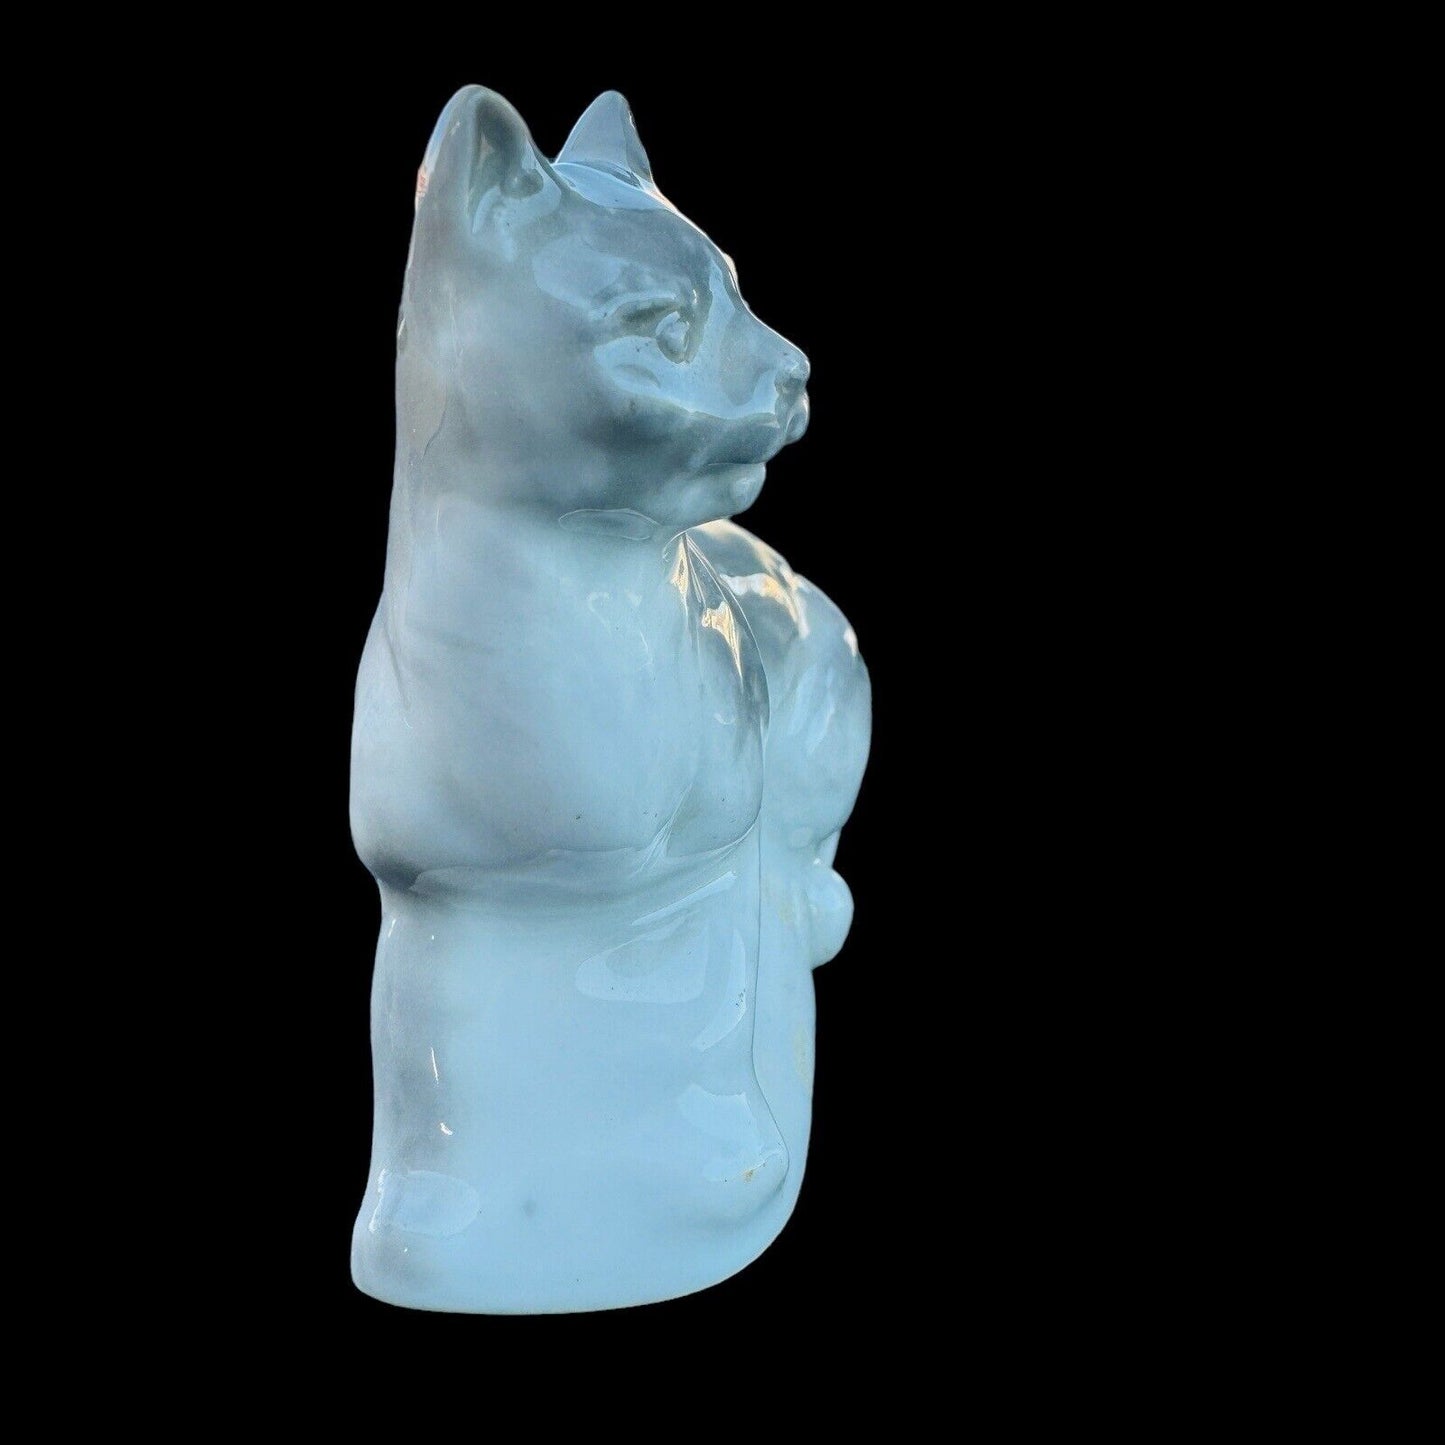 Rare 1930s Camille Tharaud Limoges Porcelain Cat Figurine France